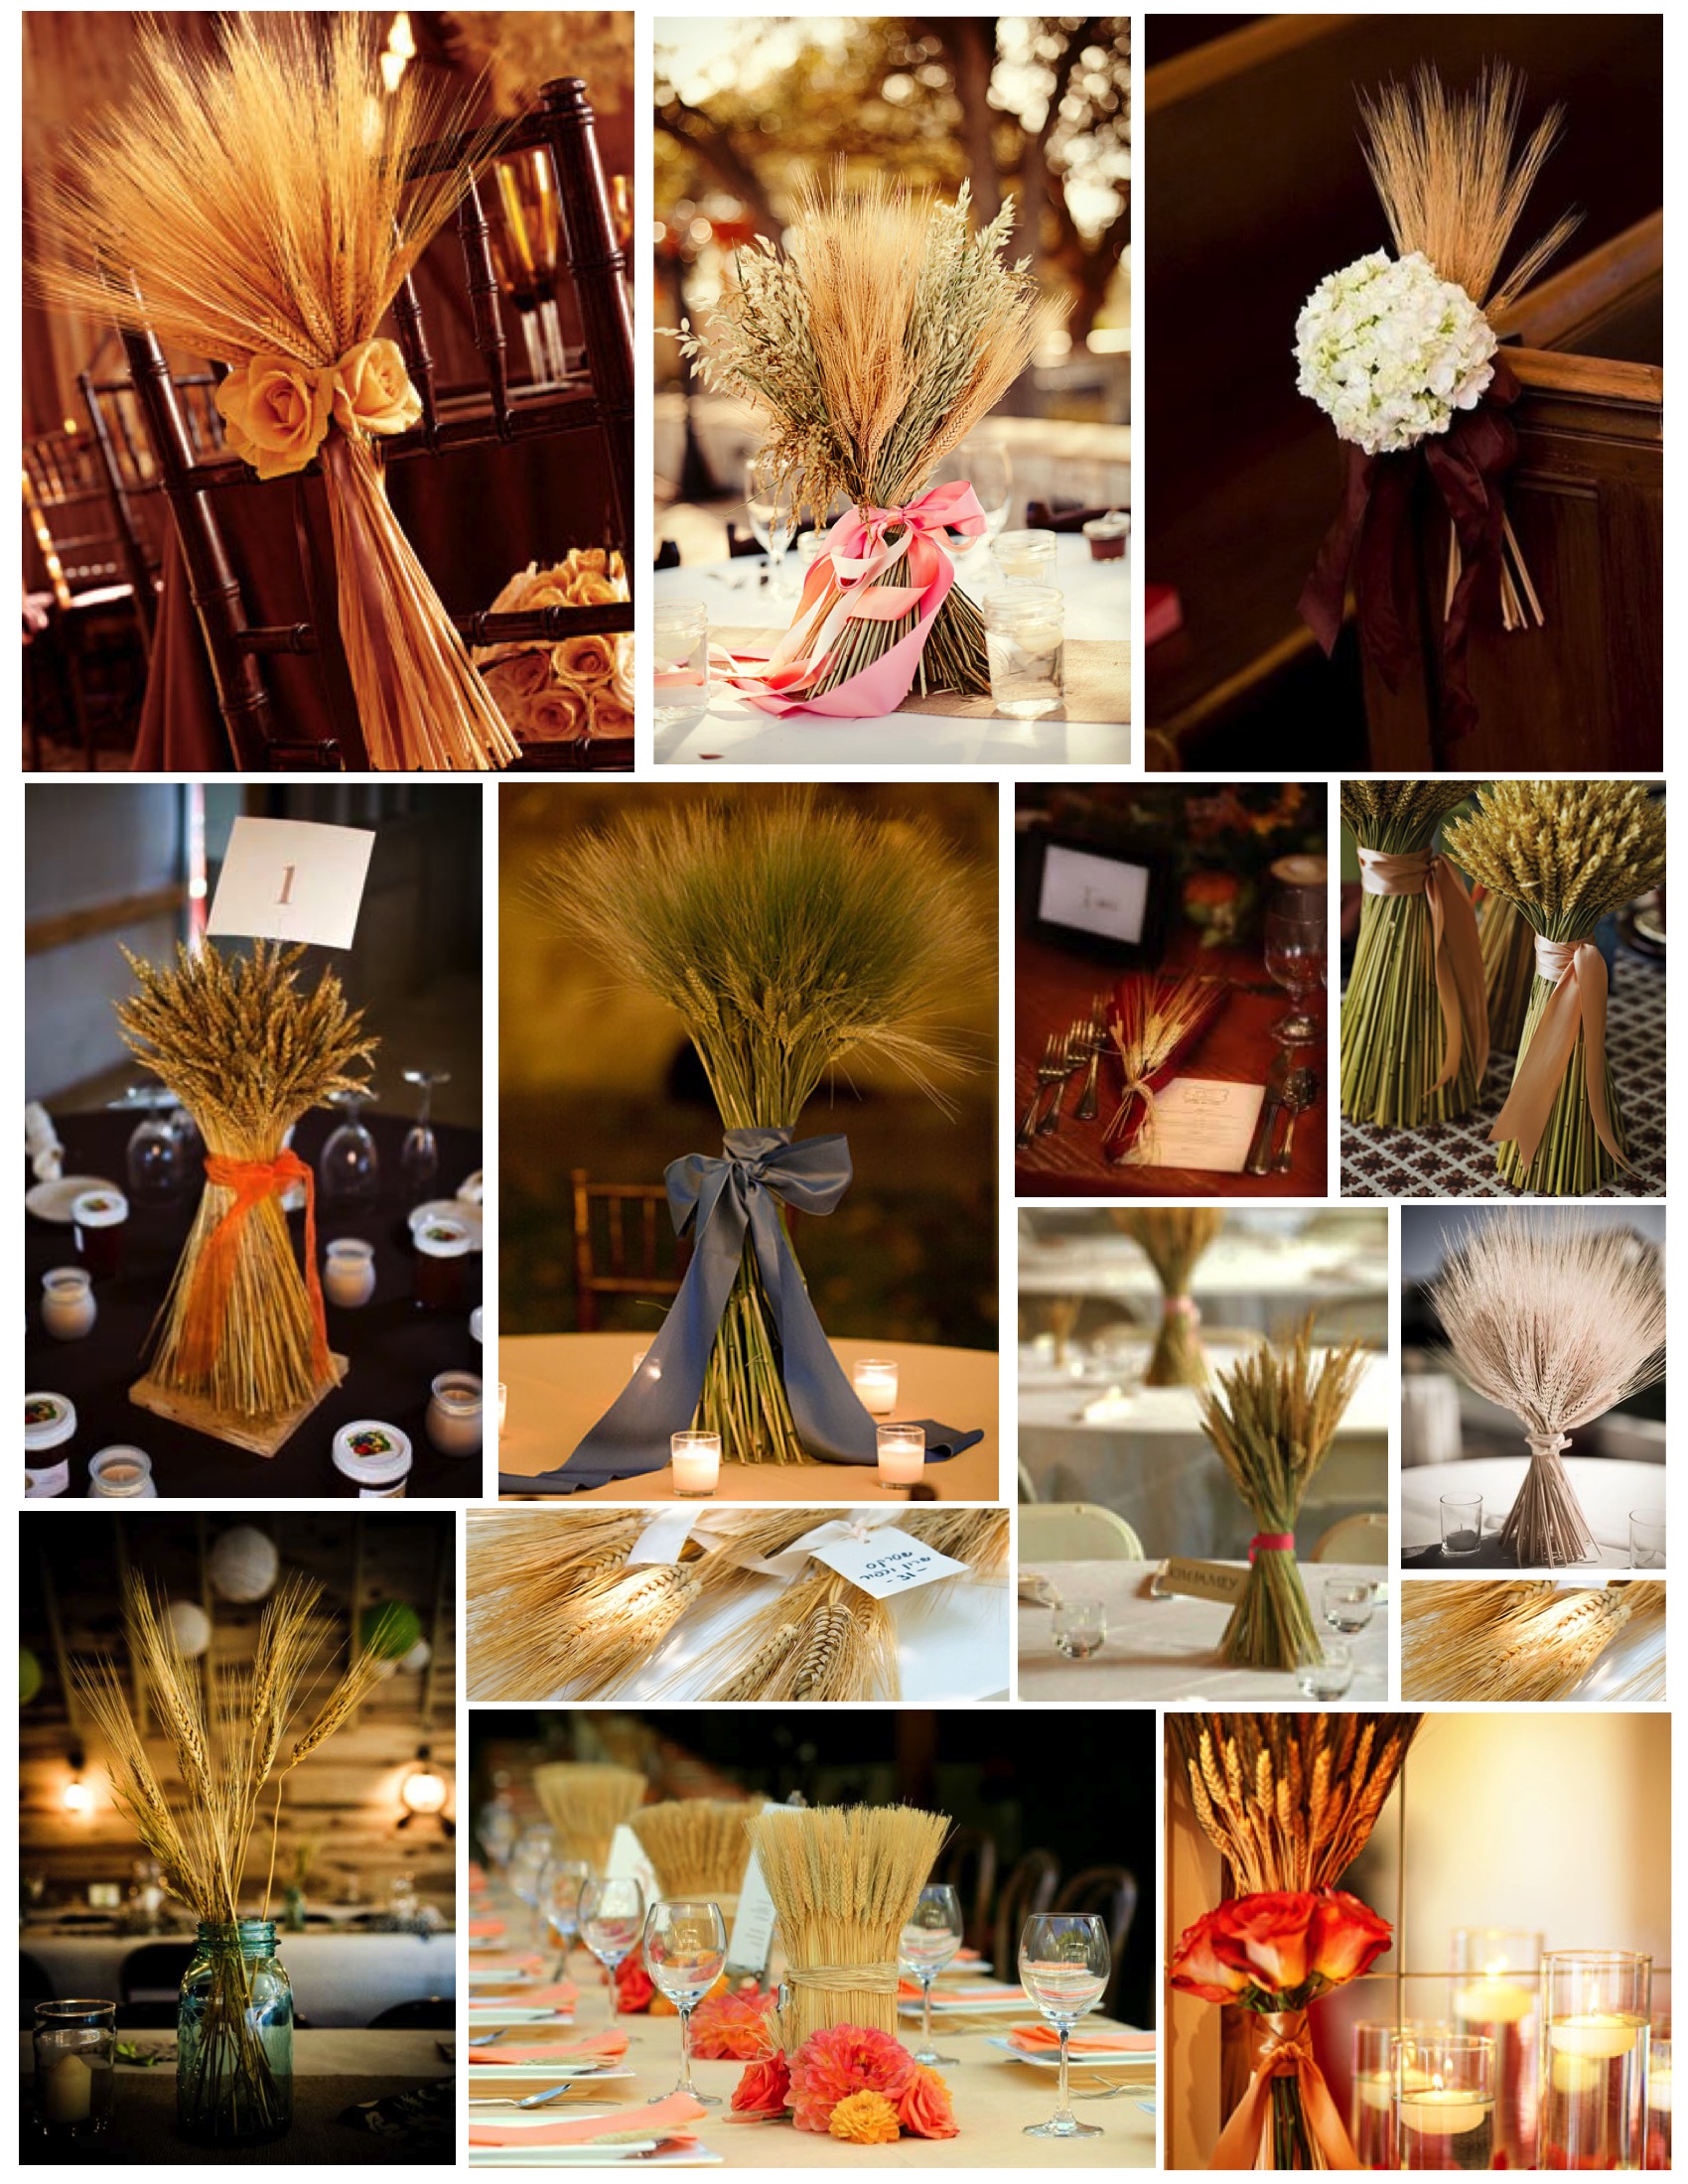 The Natural Appeal | Within House Of Interior Of Style Appeal The Bounty A Wheat